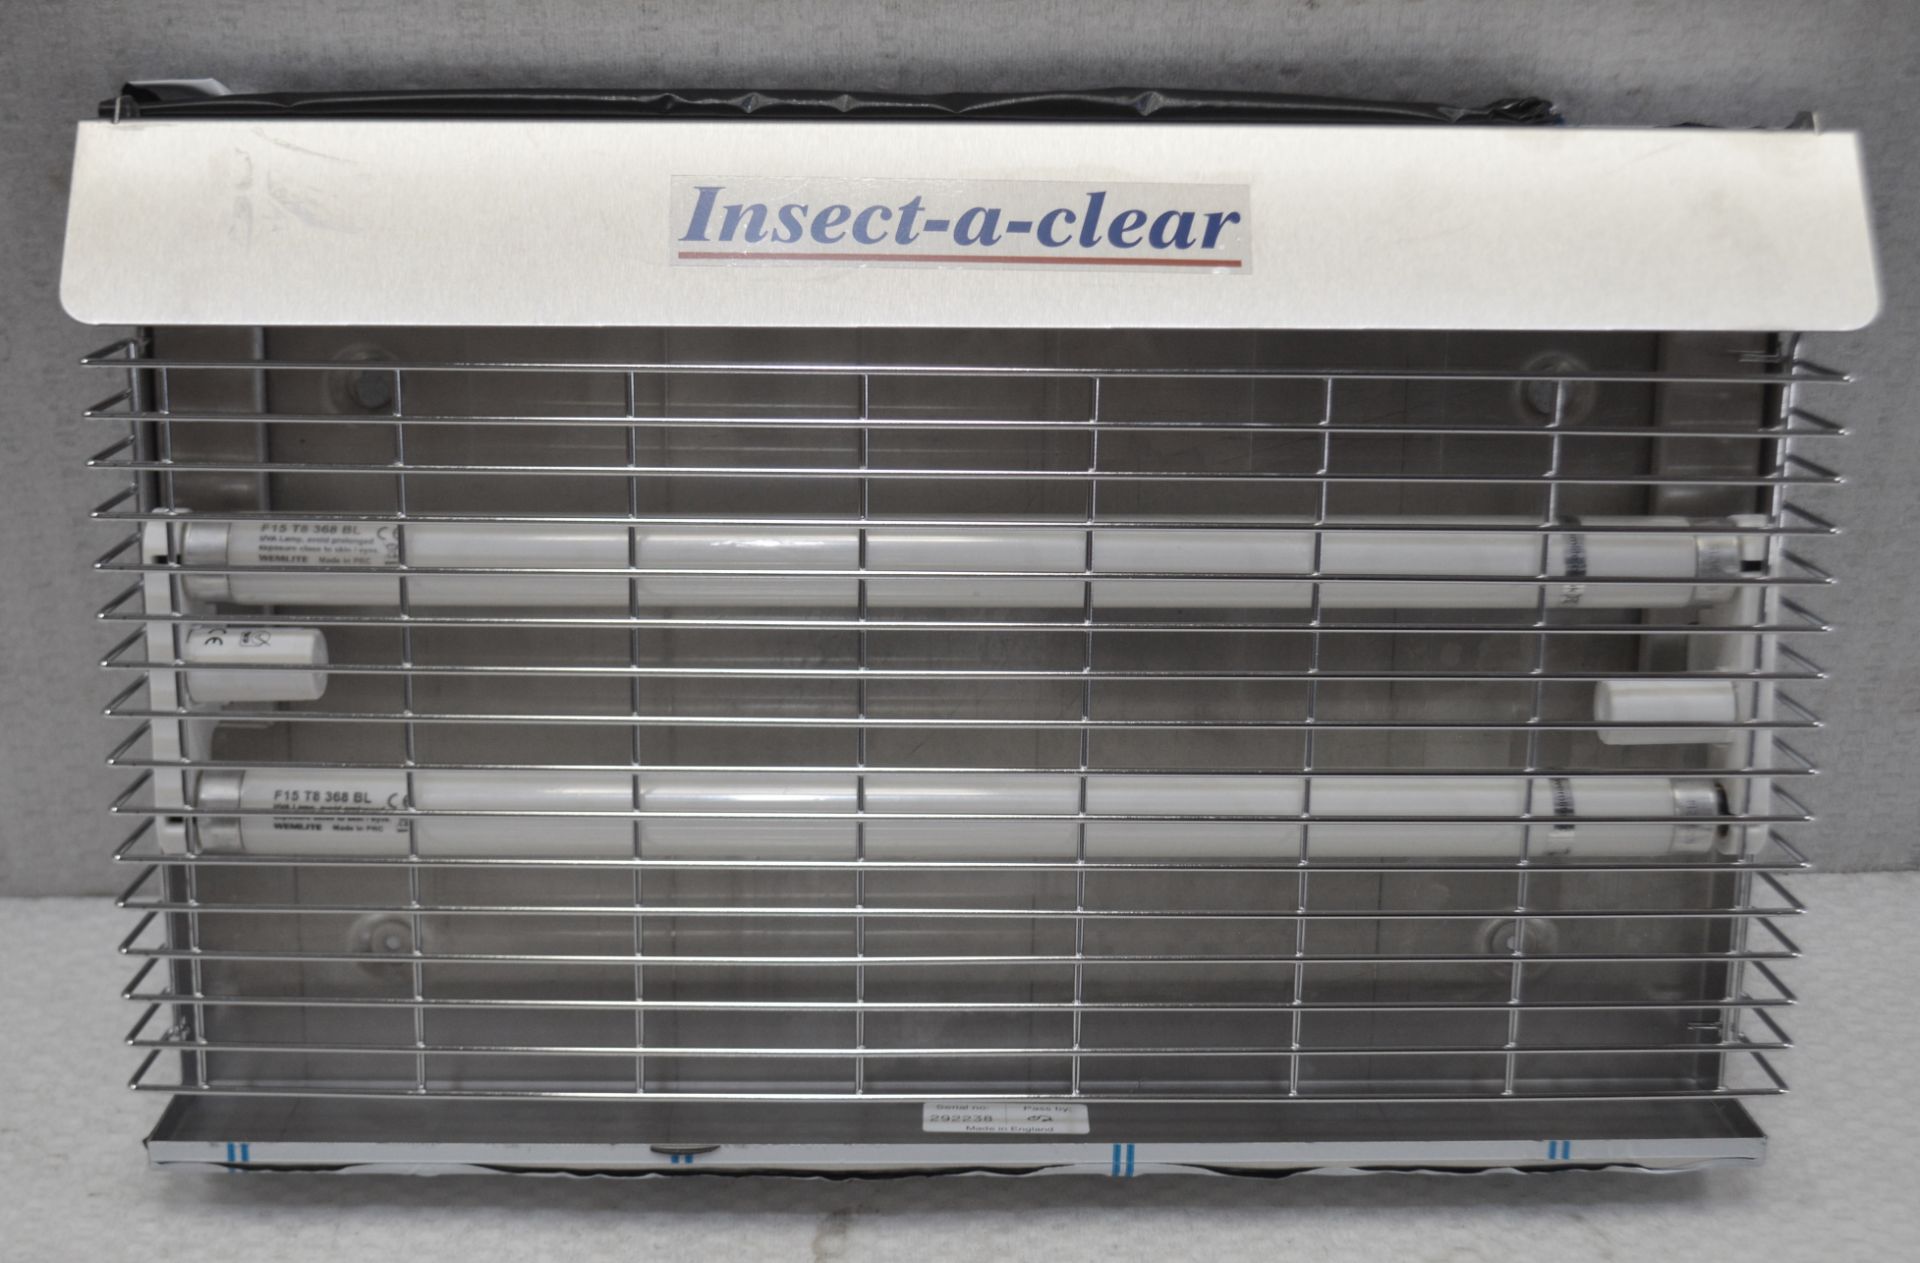 1 x Insect a Clear Insect Fly Killer – Fitted with Two 15 Watt Bulbs - Suitable for Wall Mounting or - Image 2 of 2